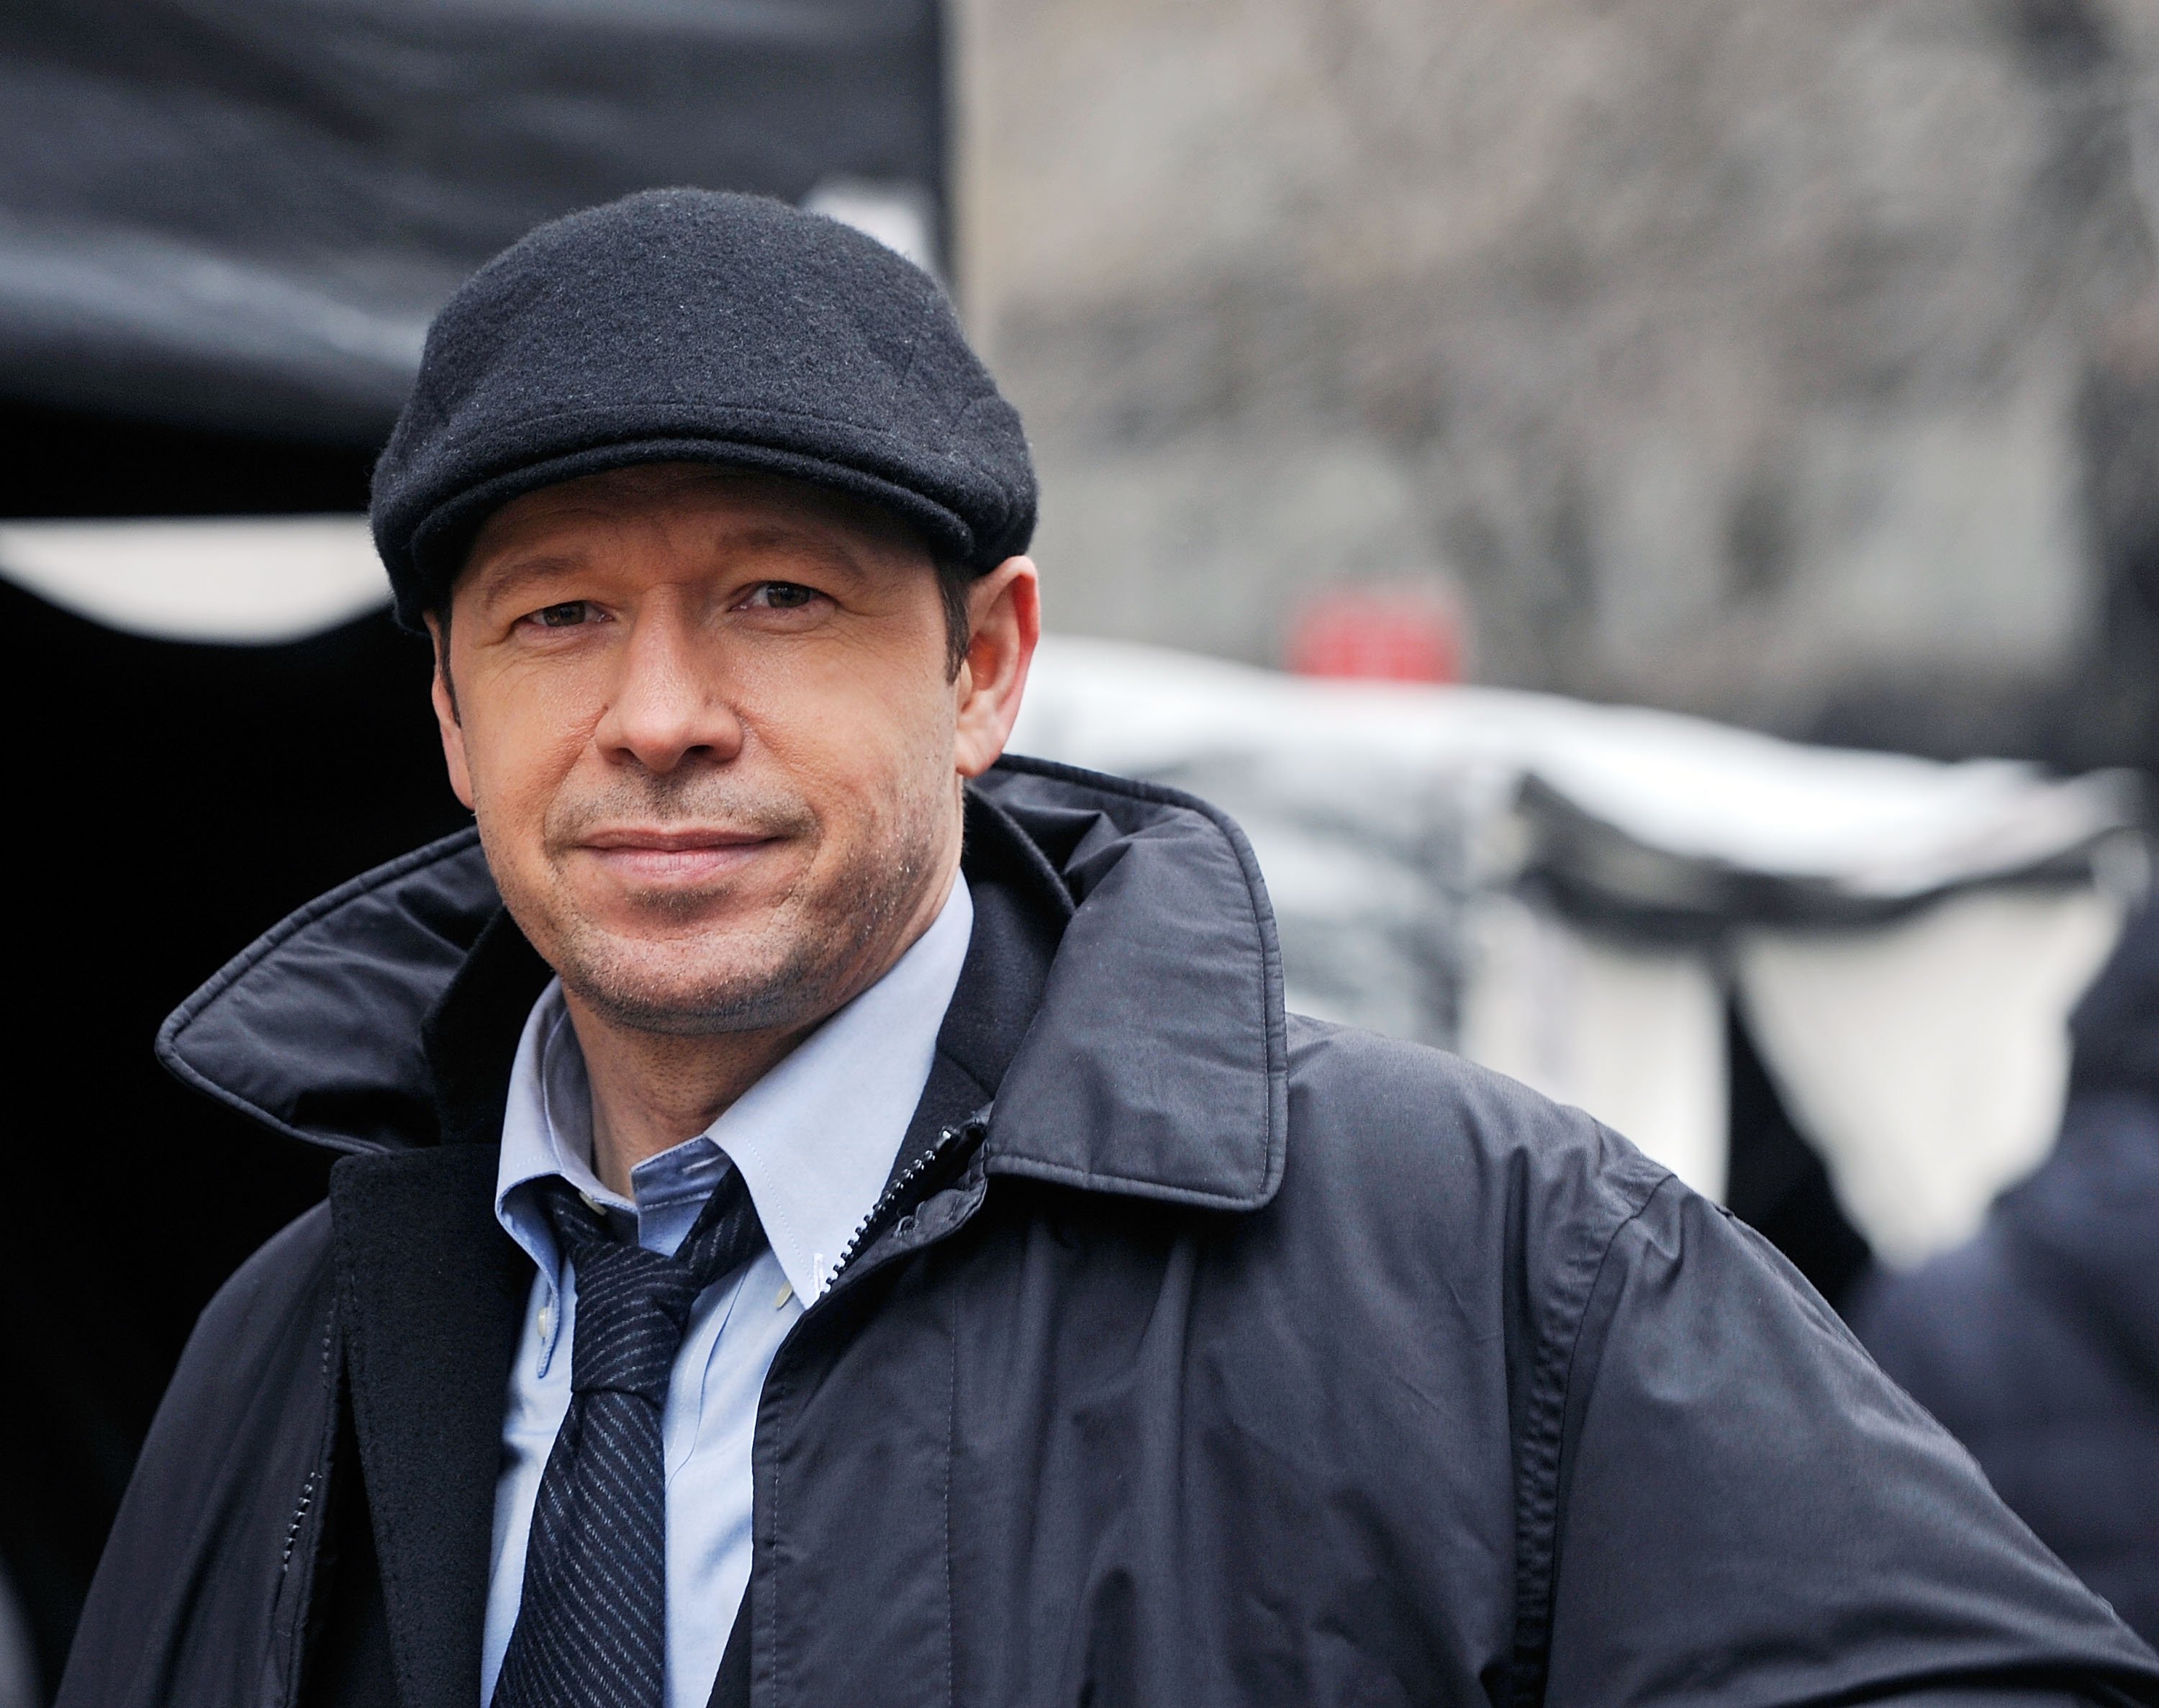 Donnie Wahlberg filming on location for "Blue Bloods"on March 1, 2012 in New York | Photo: GettyImages